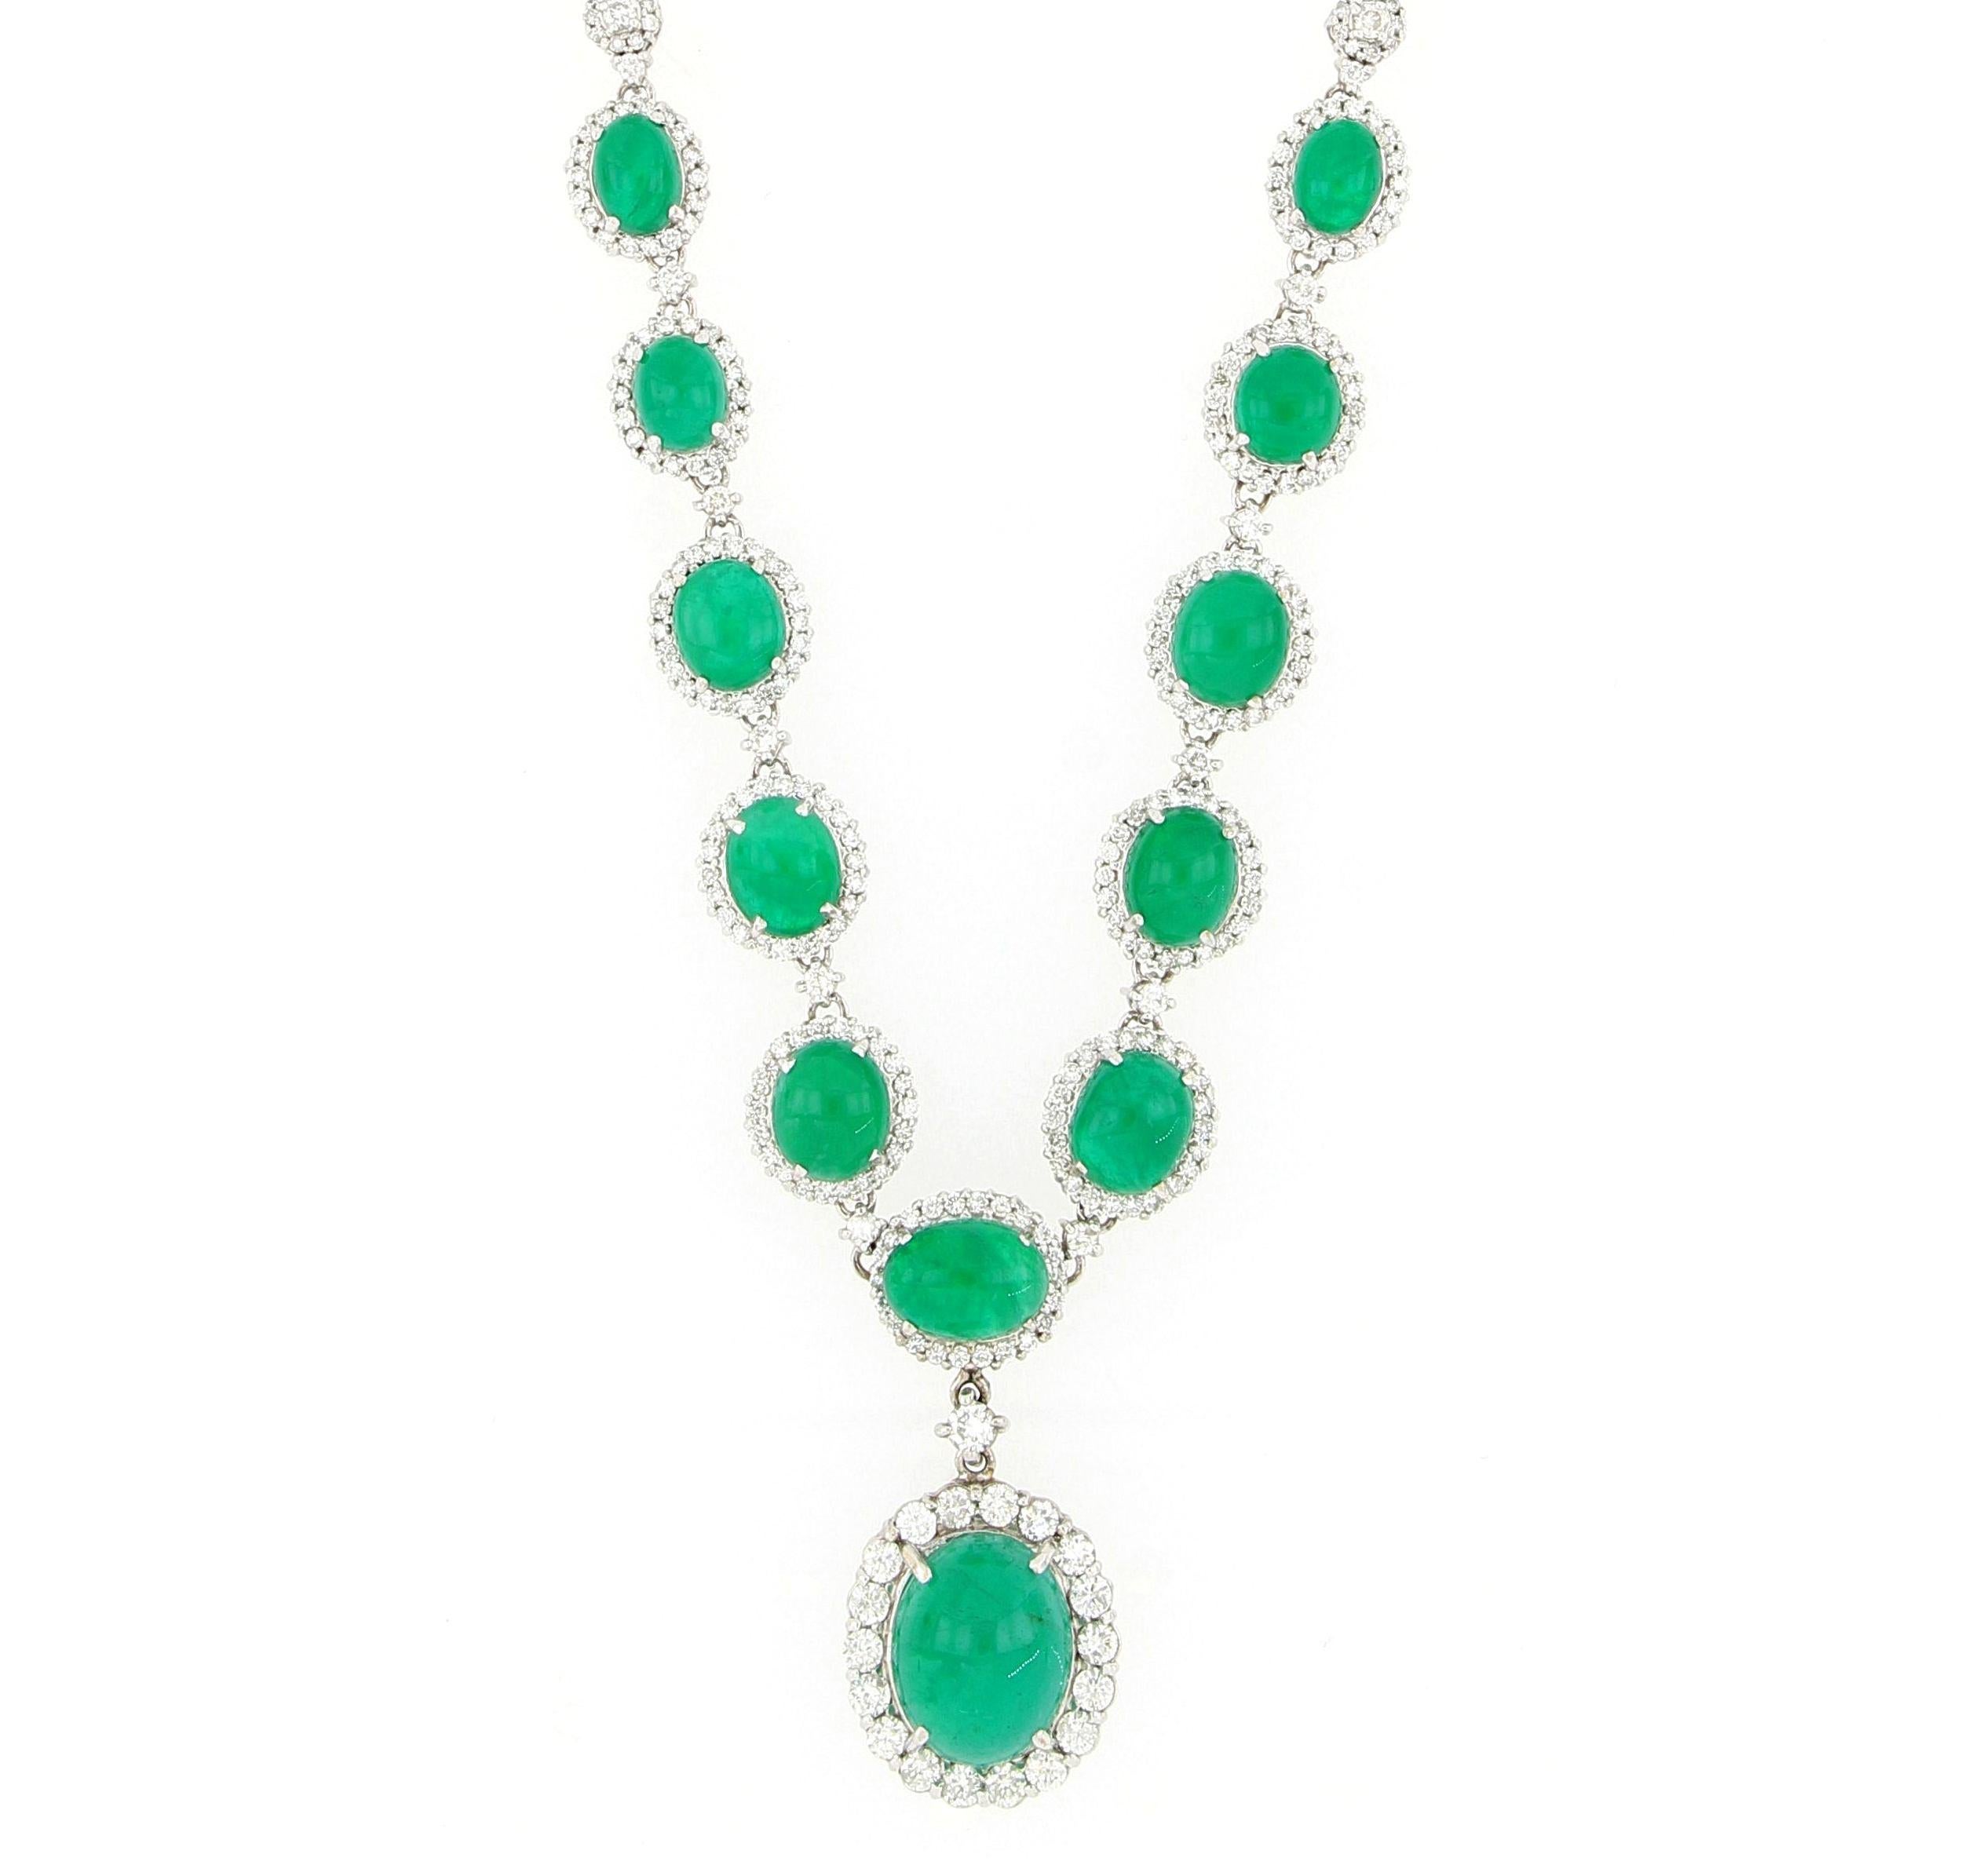 A magnificent  necklace  set with oval cabochon natural emerald of vivid bright green colour and very good lustre, weighing 28.34 carats in total accented with round brilliant cut diamonds  weighing 5.87 carats, mounted in 18 karat white